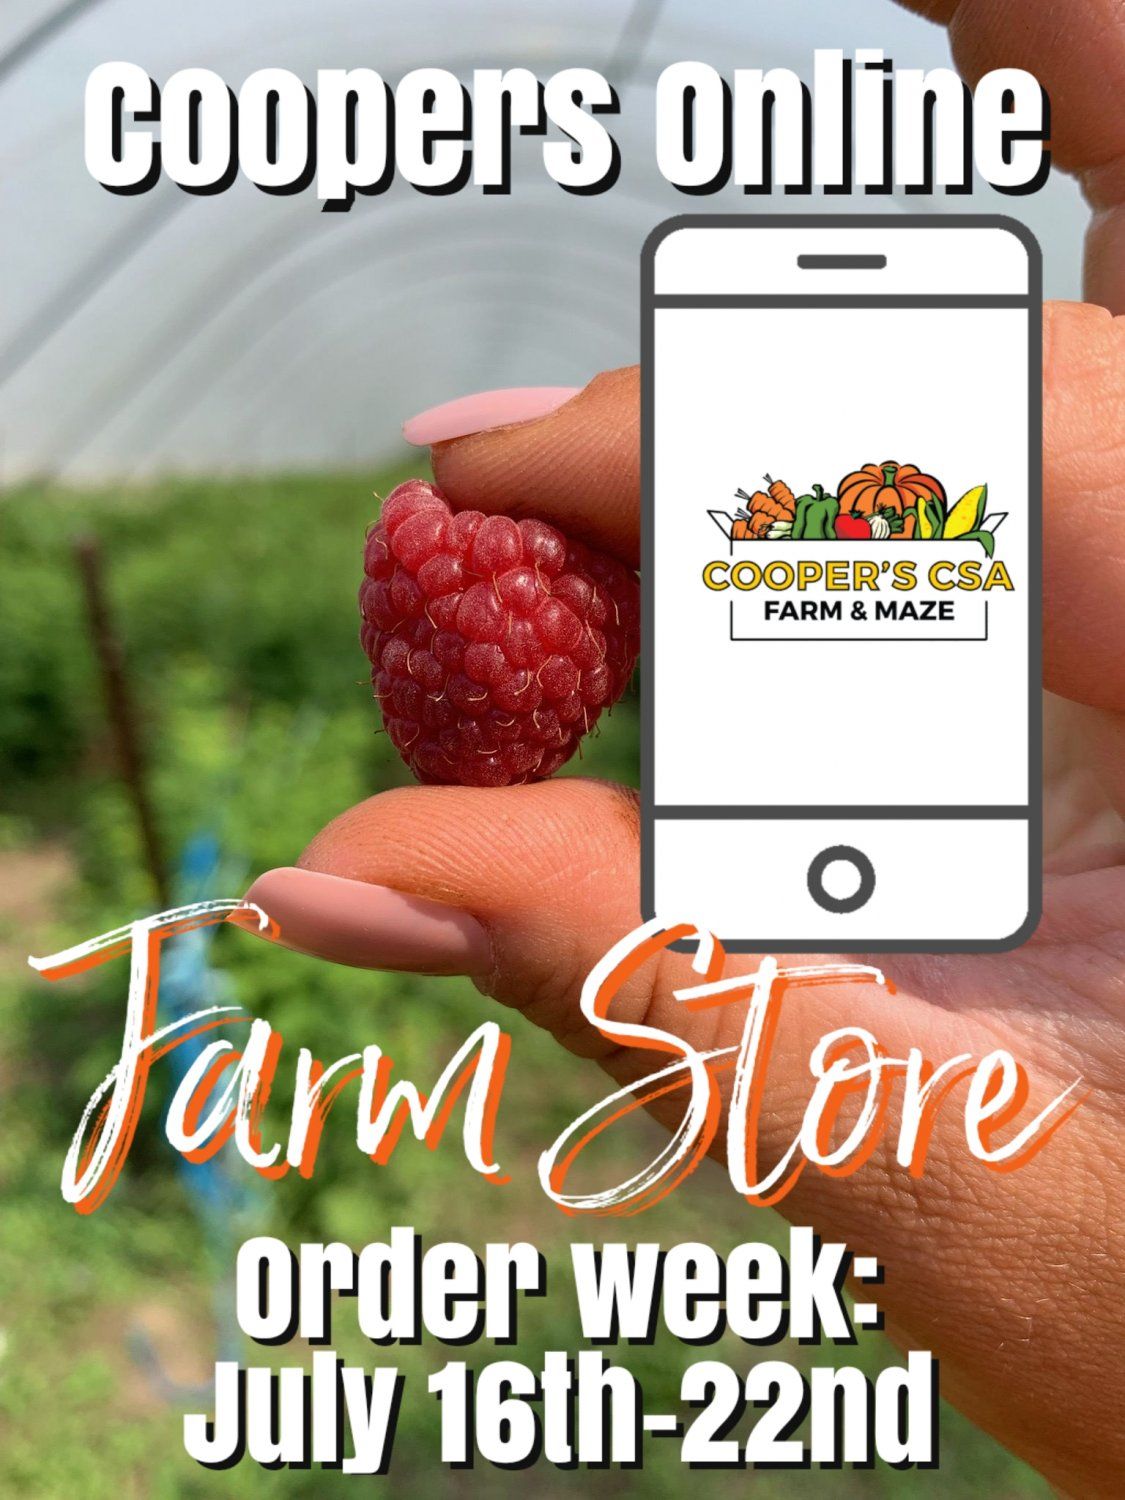 Previous Happening: Coopers Online Farm Store- Order Week July 16th-22nd